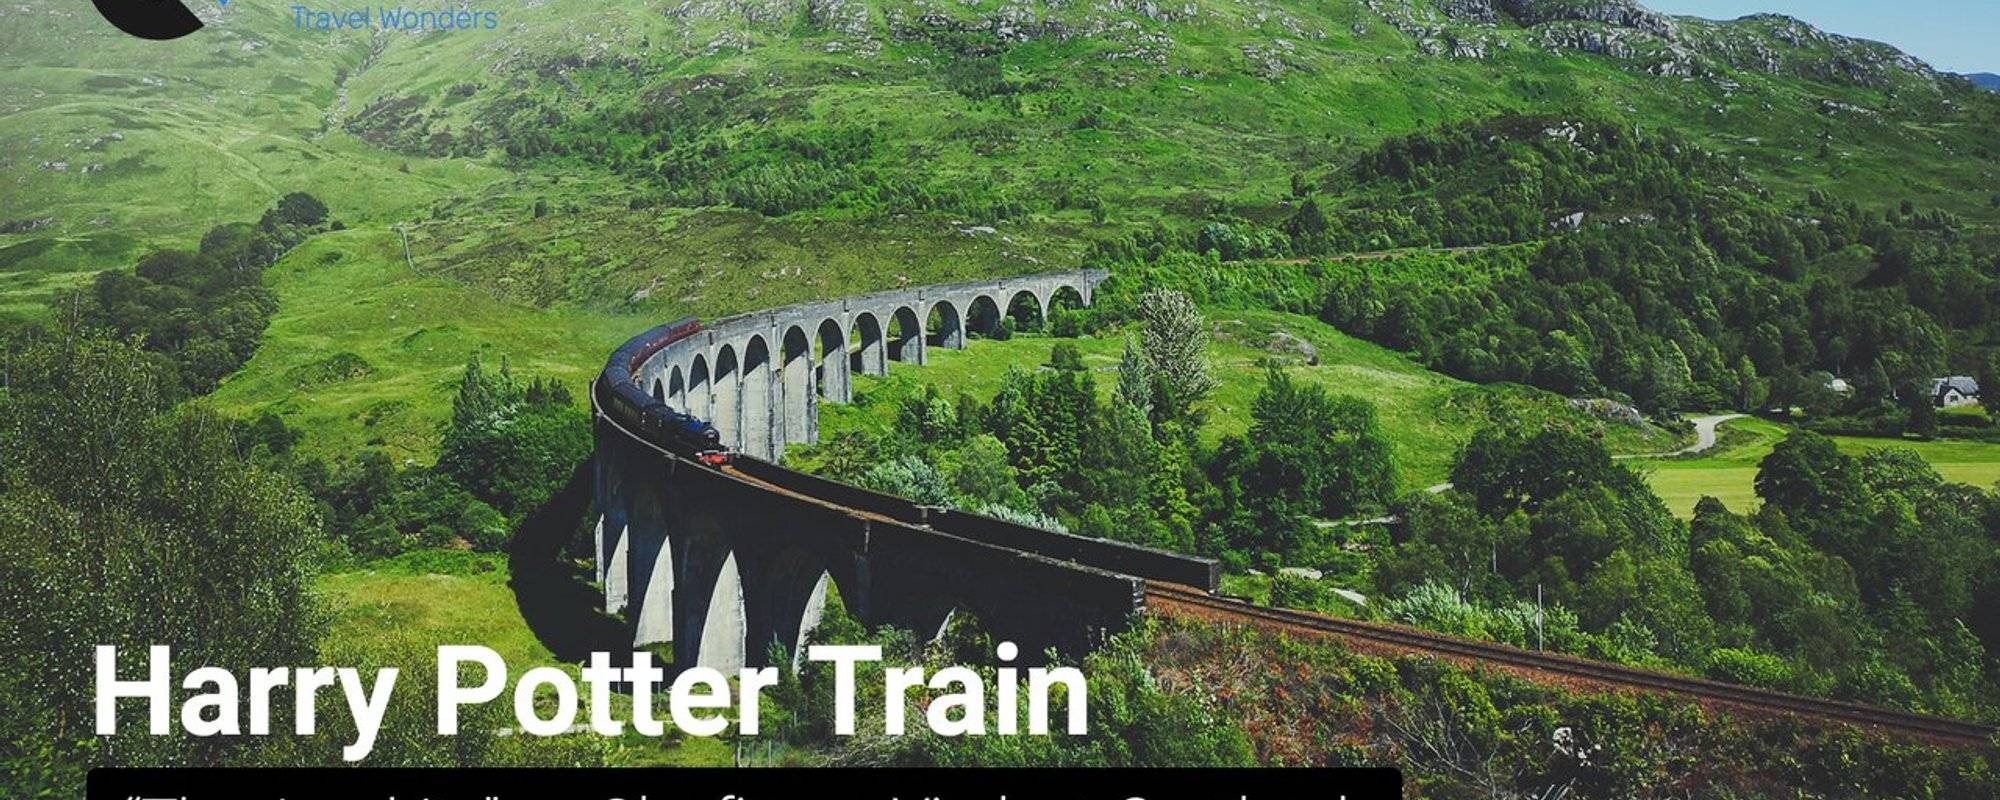 Getting to Glenfinnan Viaduct to See the Harry Potter Train